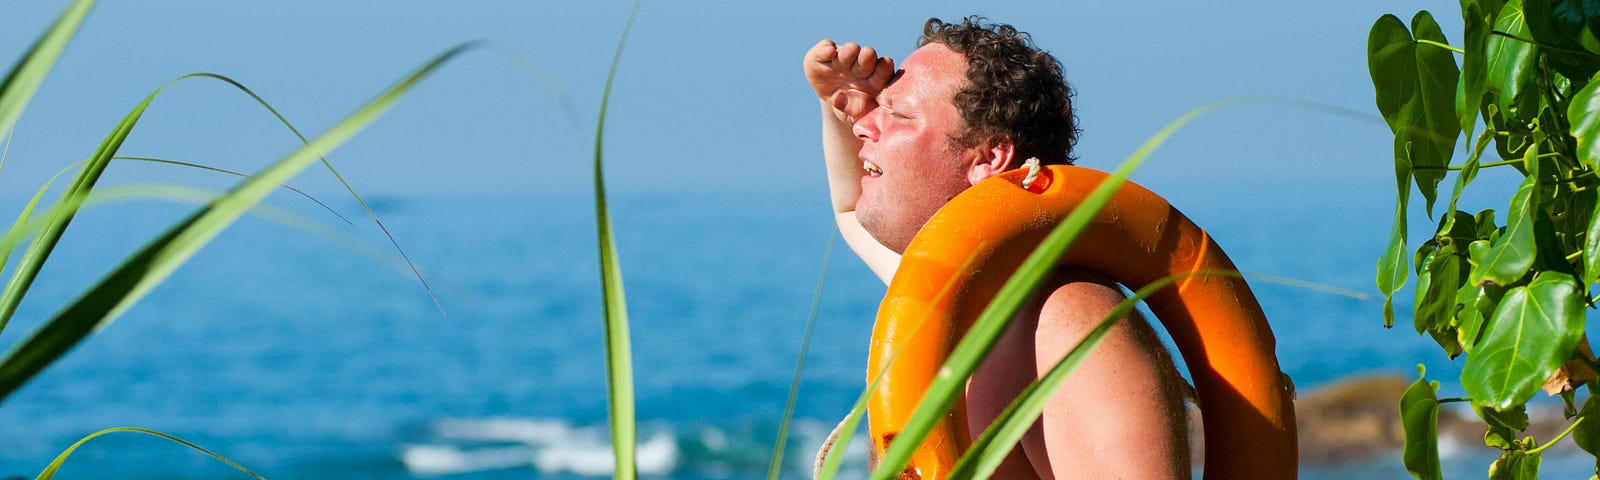 Man looking out over ocean with life preserver on his shoulder